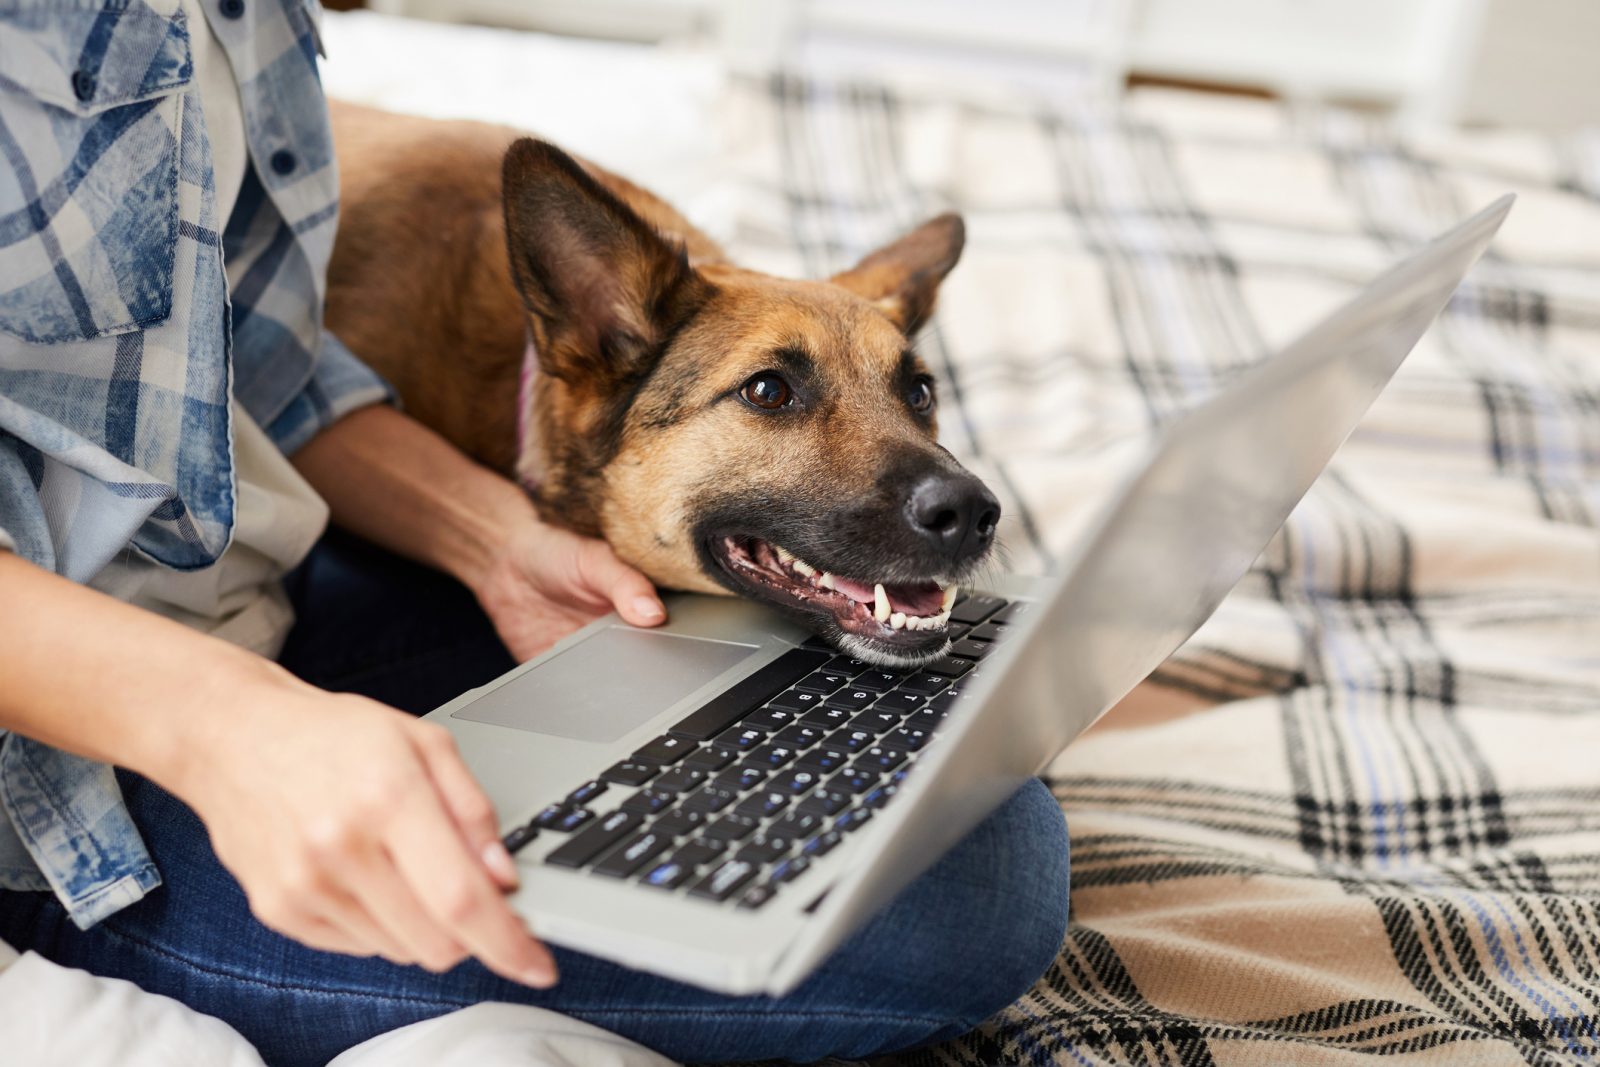 Brown-eyed dog rests its chin on an open laptop, looking at the screen while a person holds the laptop on a bed.